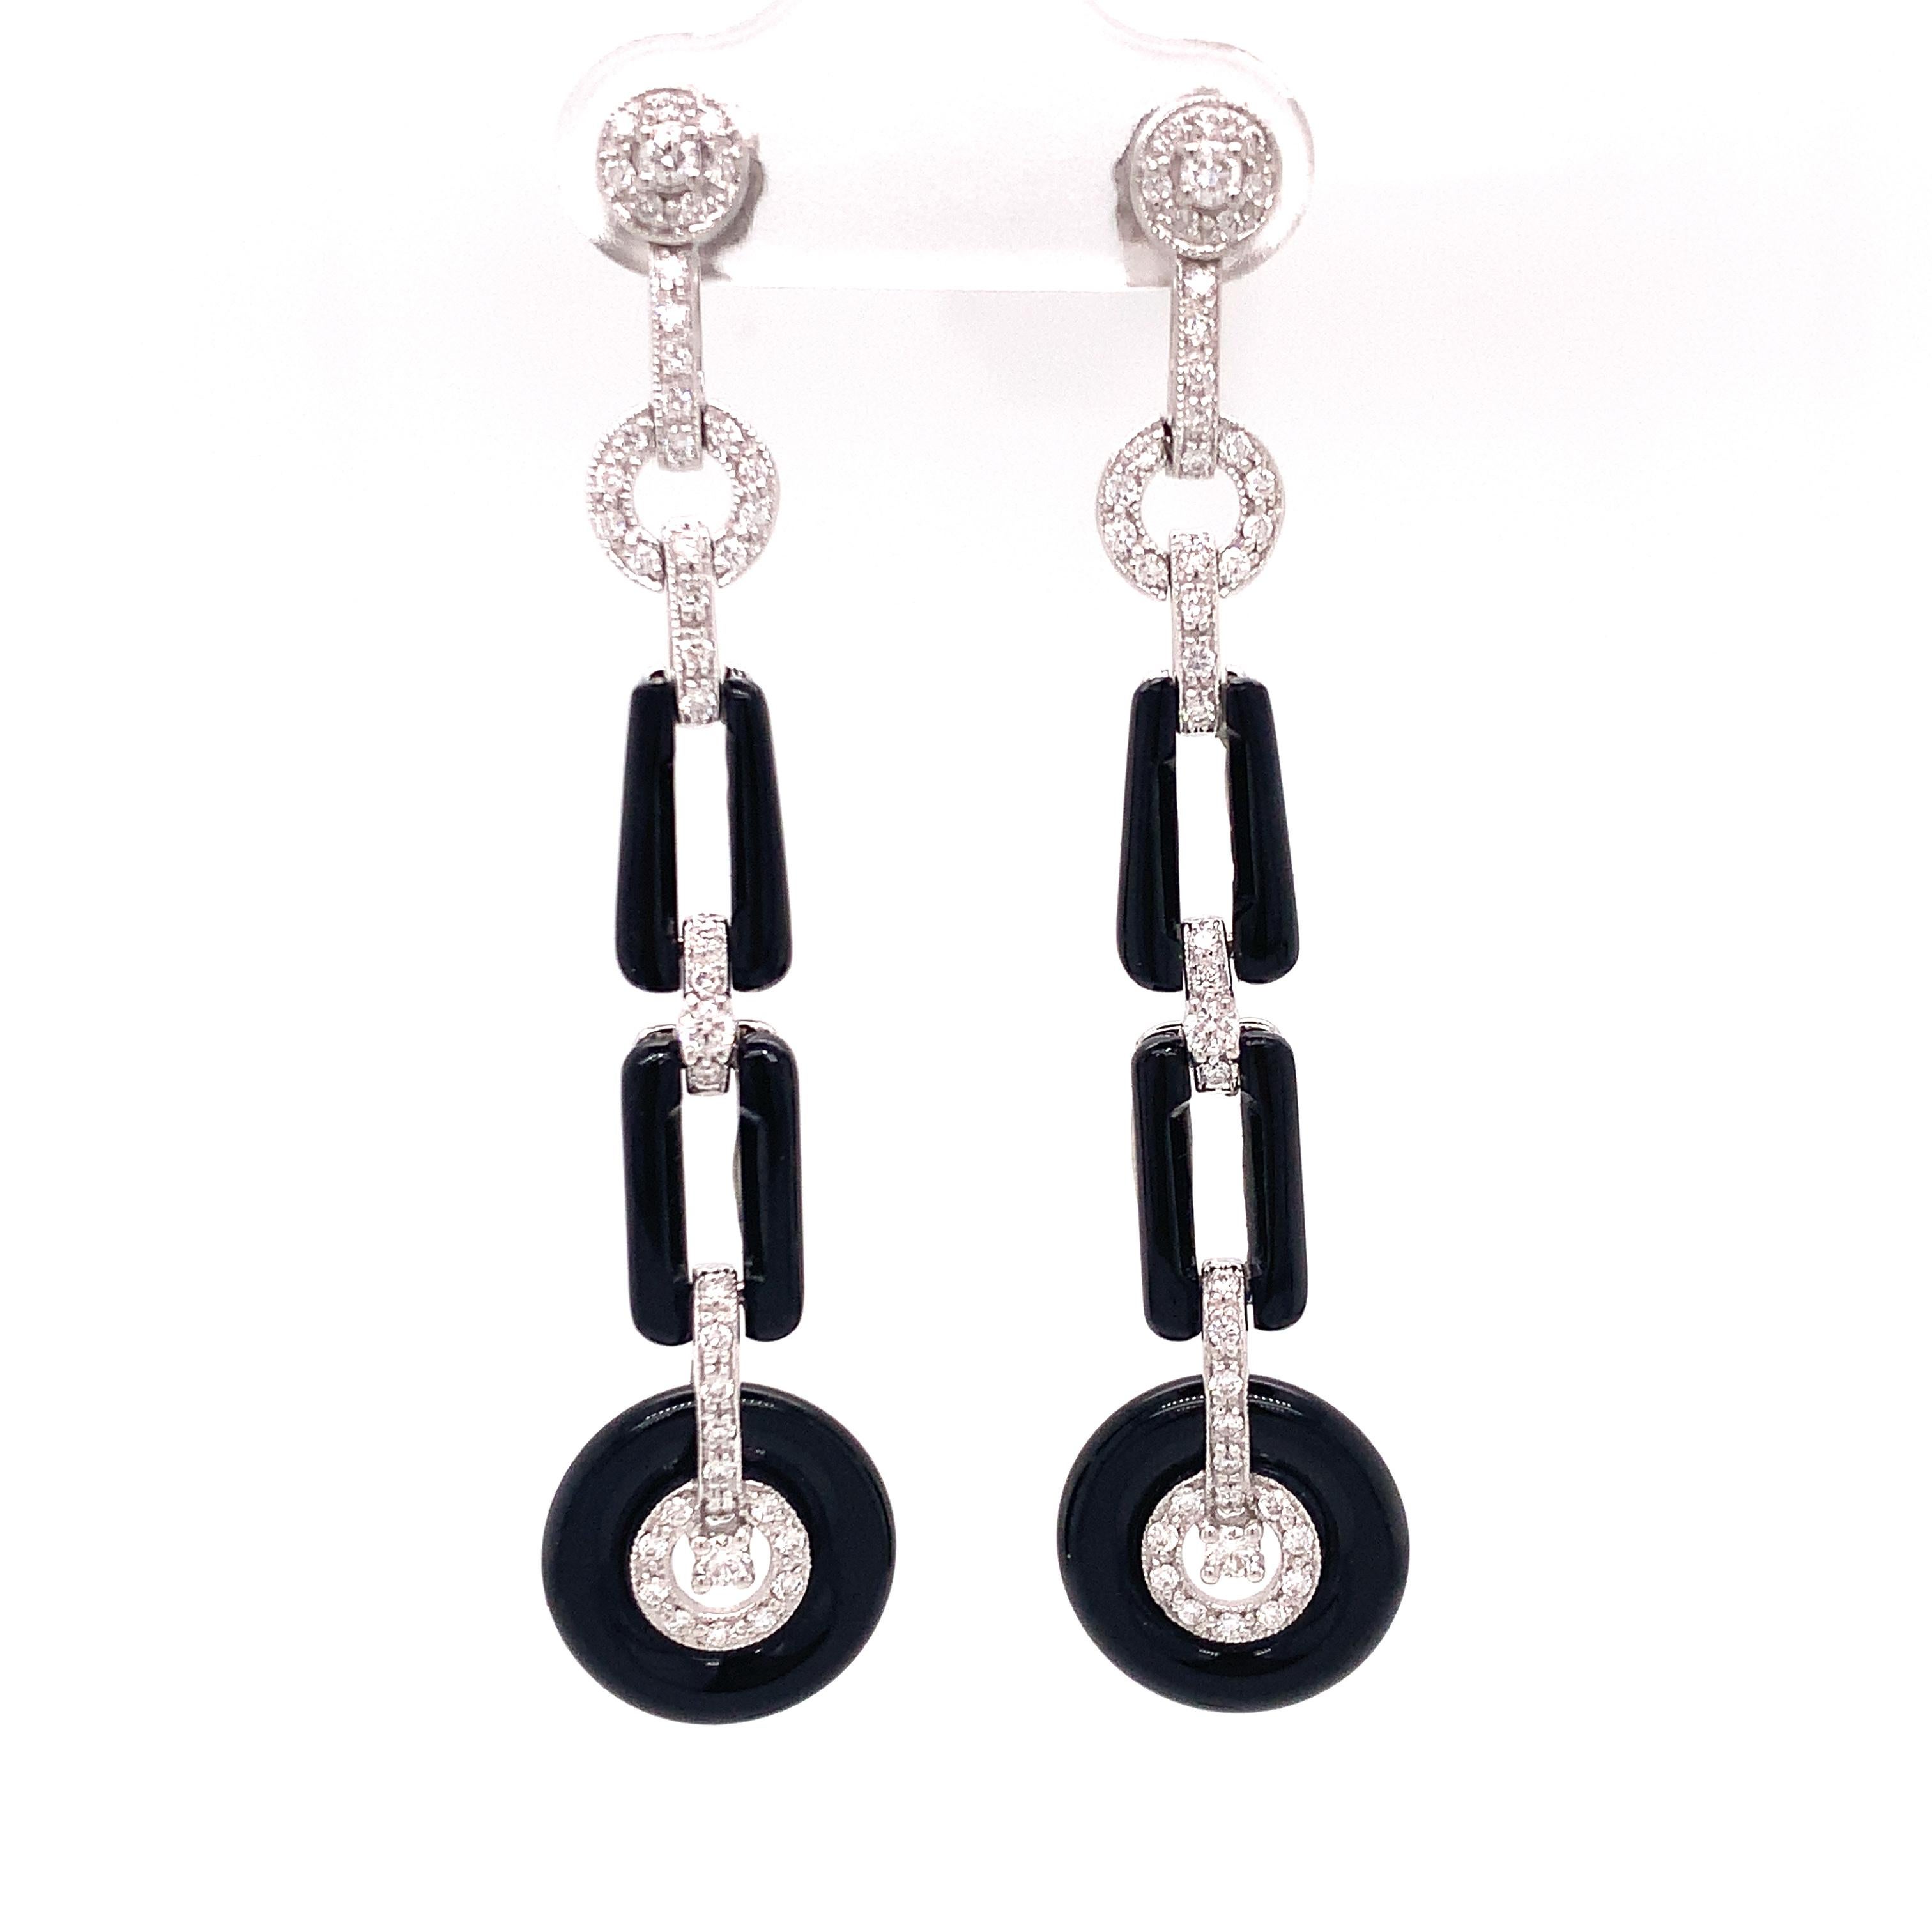 A TB favorite!  Vintage inspired art deco style drop earrings, Great Gatsby approved.  These spectacular two inch drop earrings are expertly crafted from 6.74 ct in onyx contrasting with .57 ctw in diamonds.  Set in 18kt white gold. 
  
Art Deco was